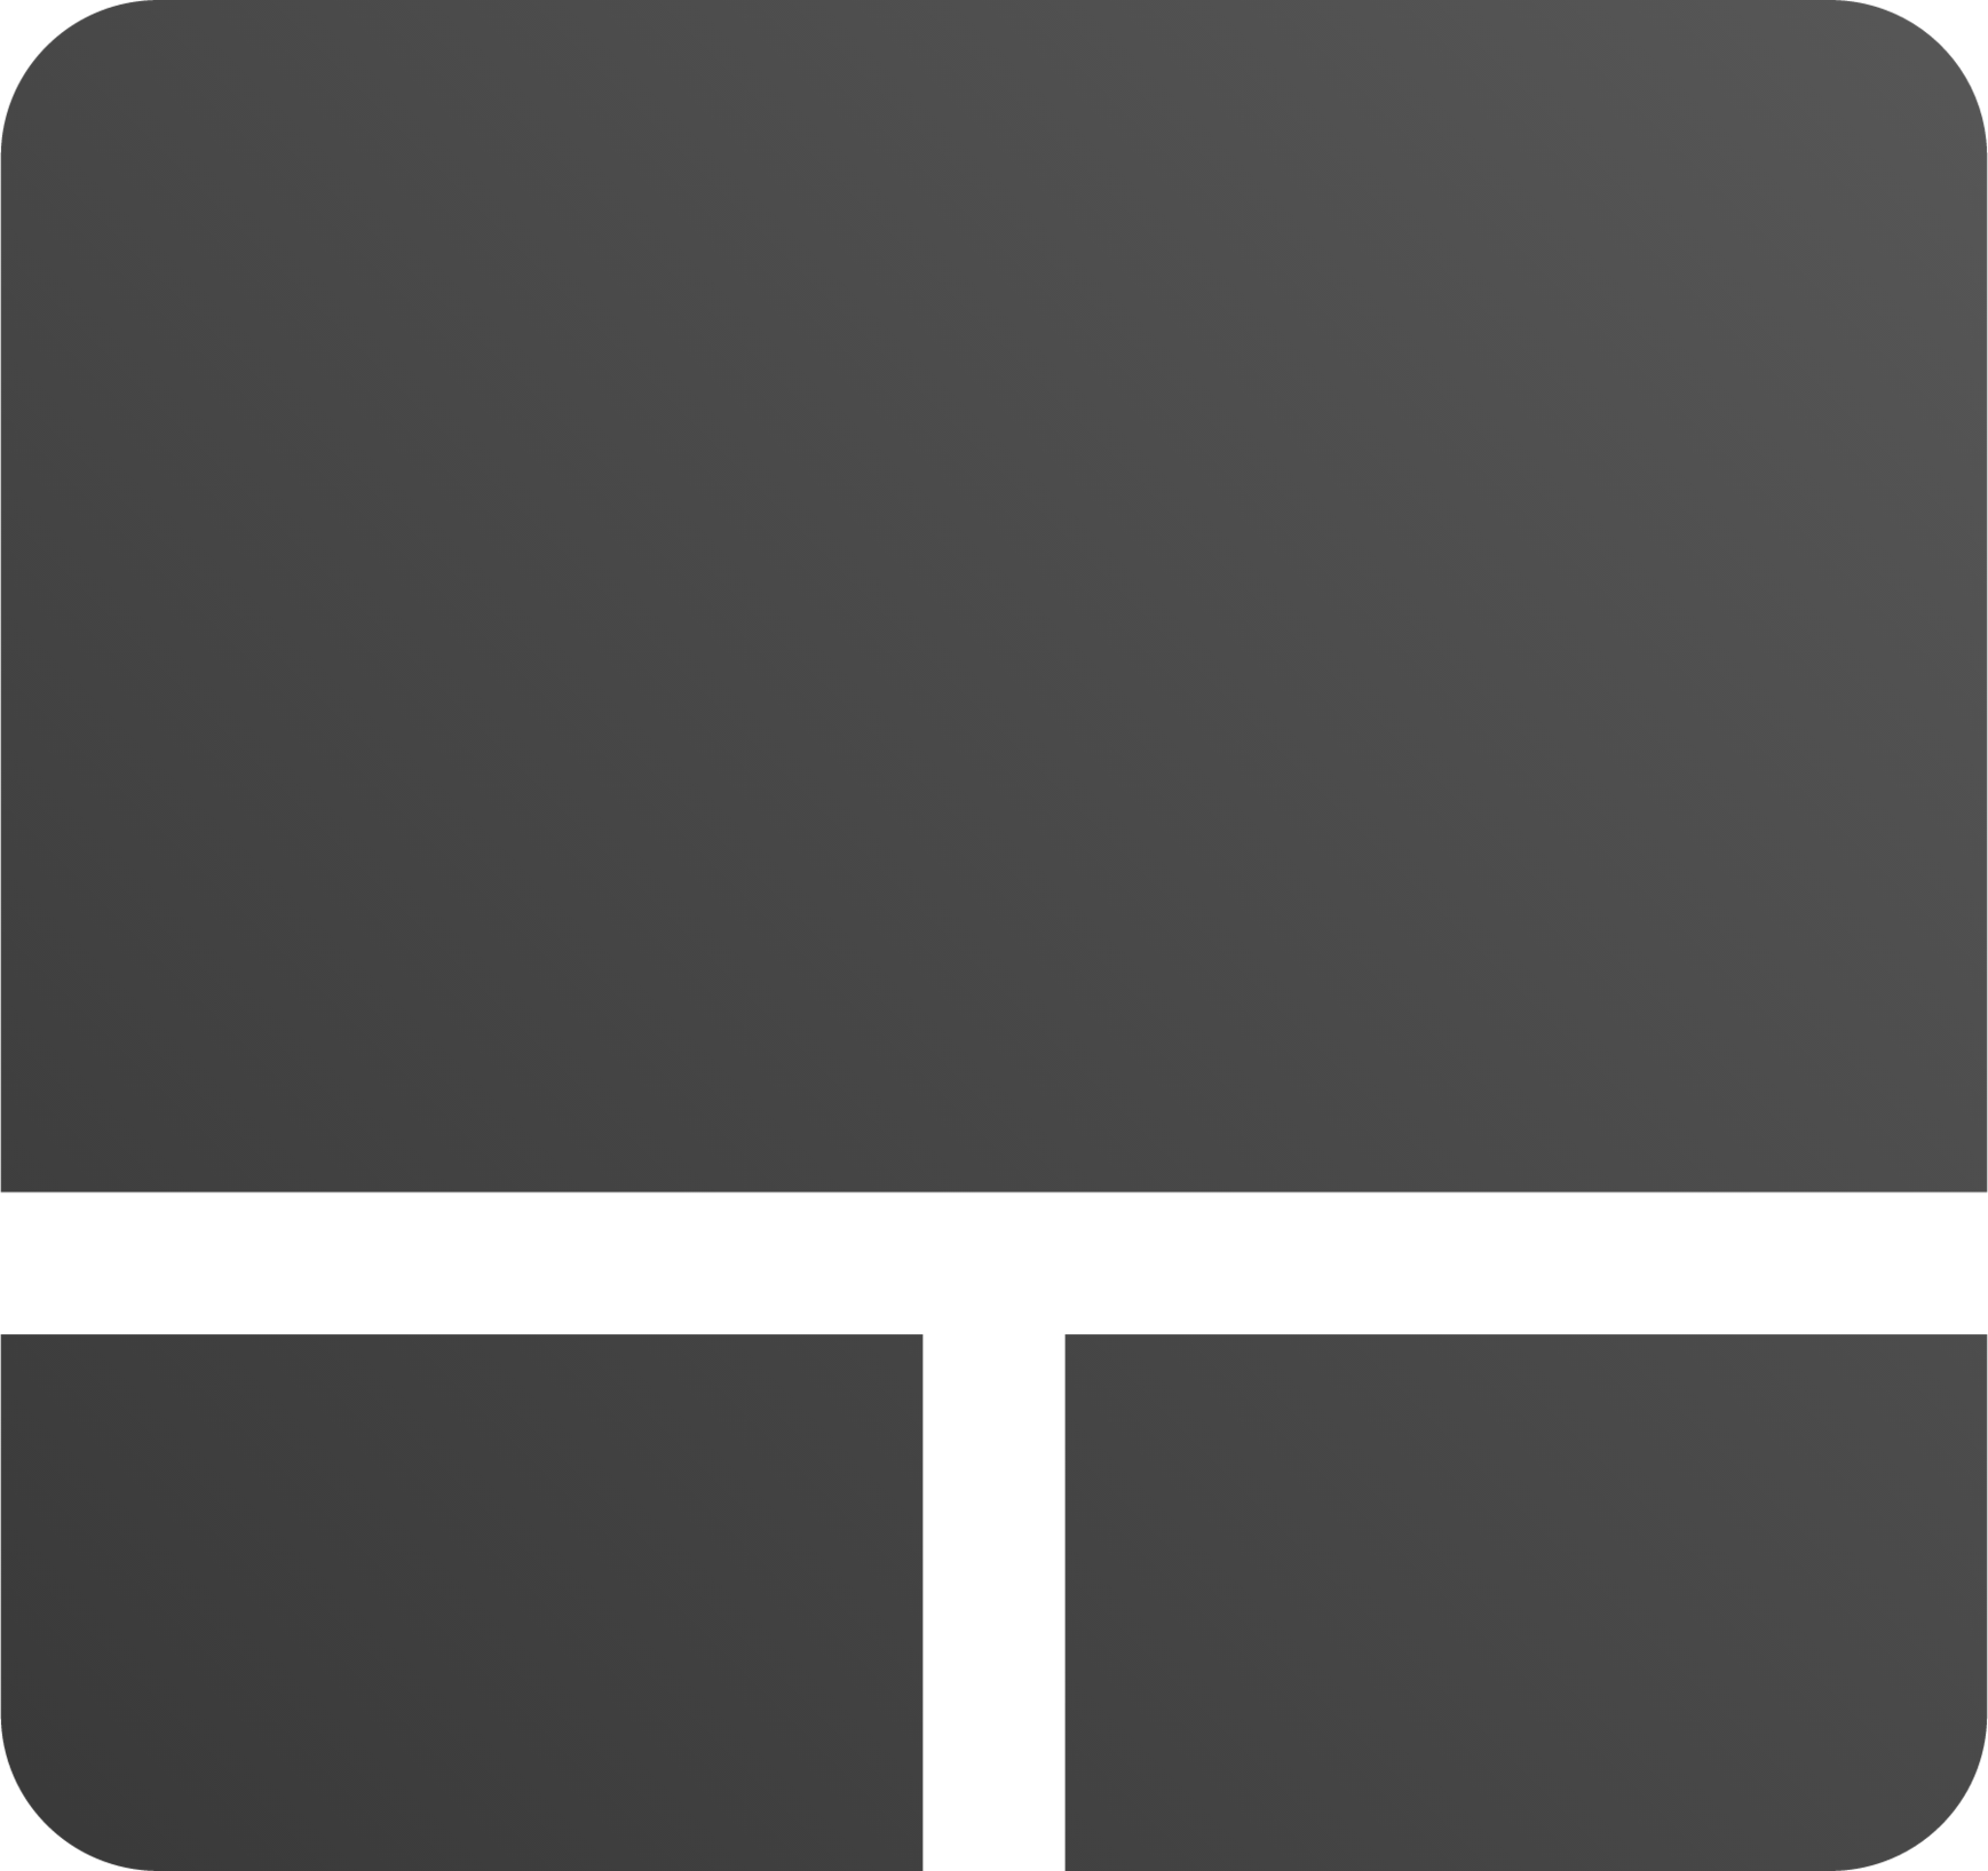 input touchpad icon